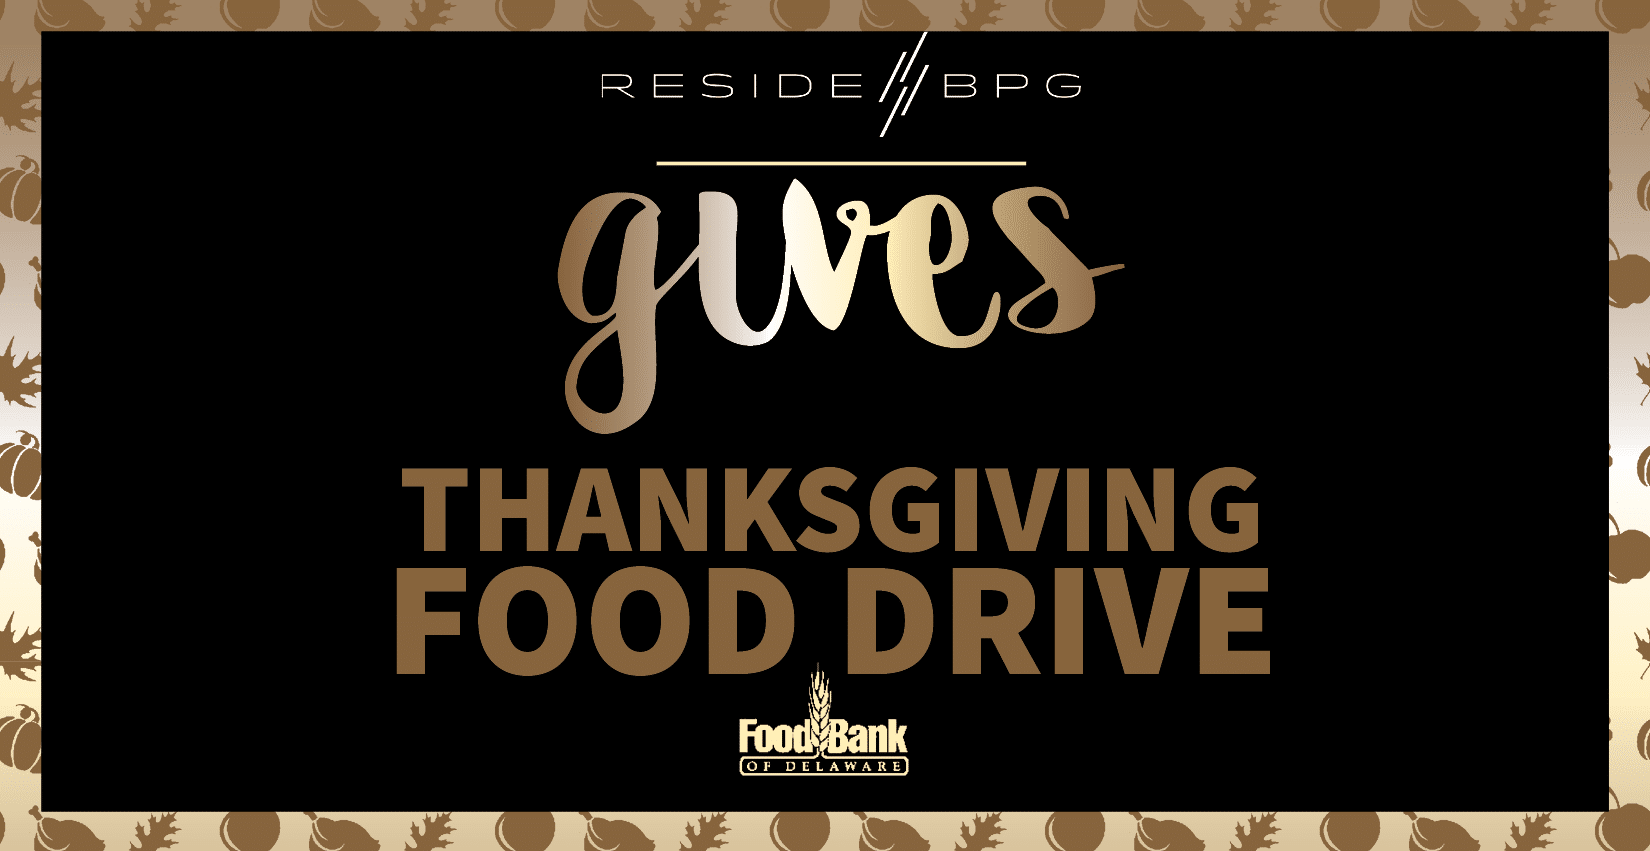 Support the Food Bank of Delaware: ResideBPG Hosts Annual Thanksgiving Food Drive